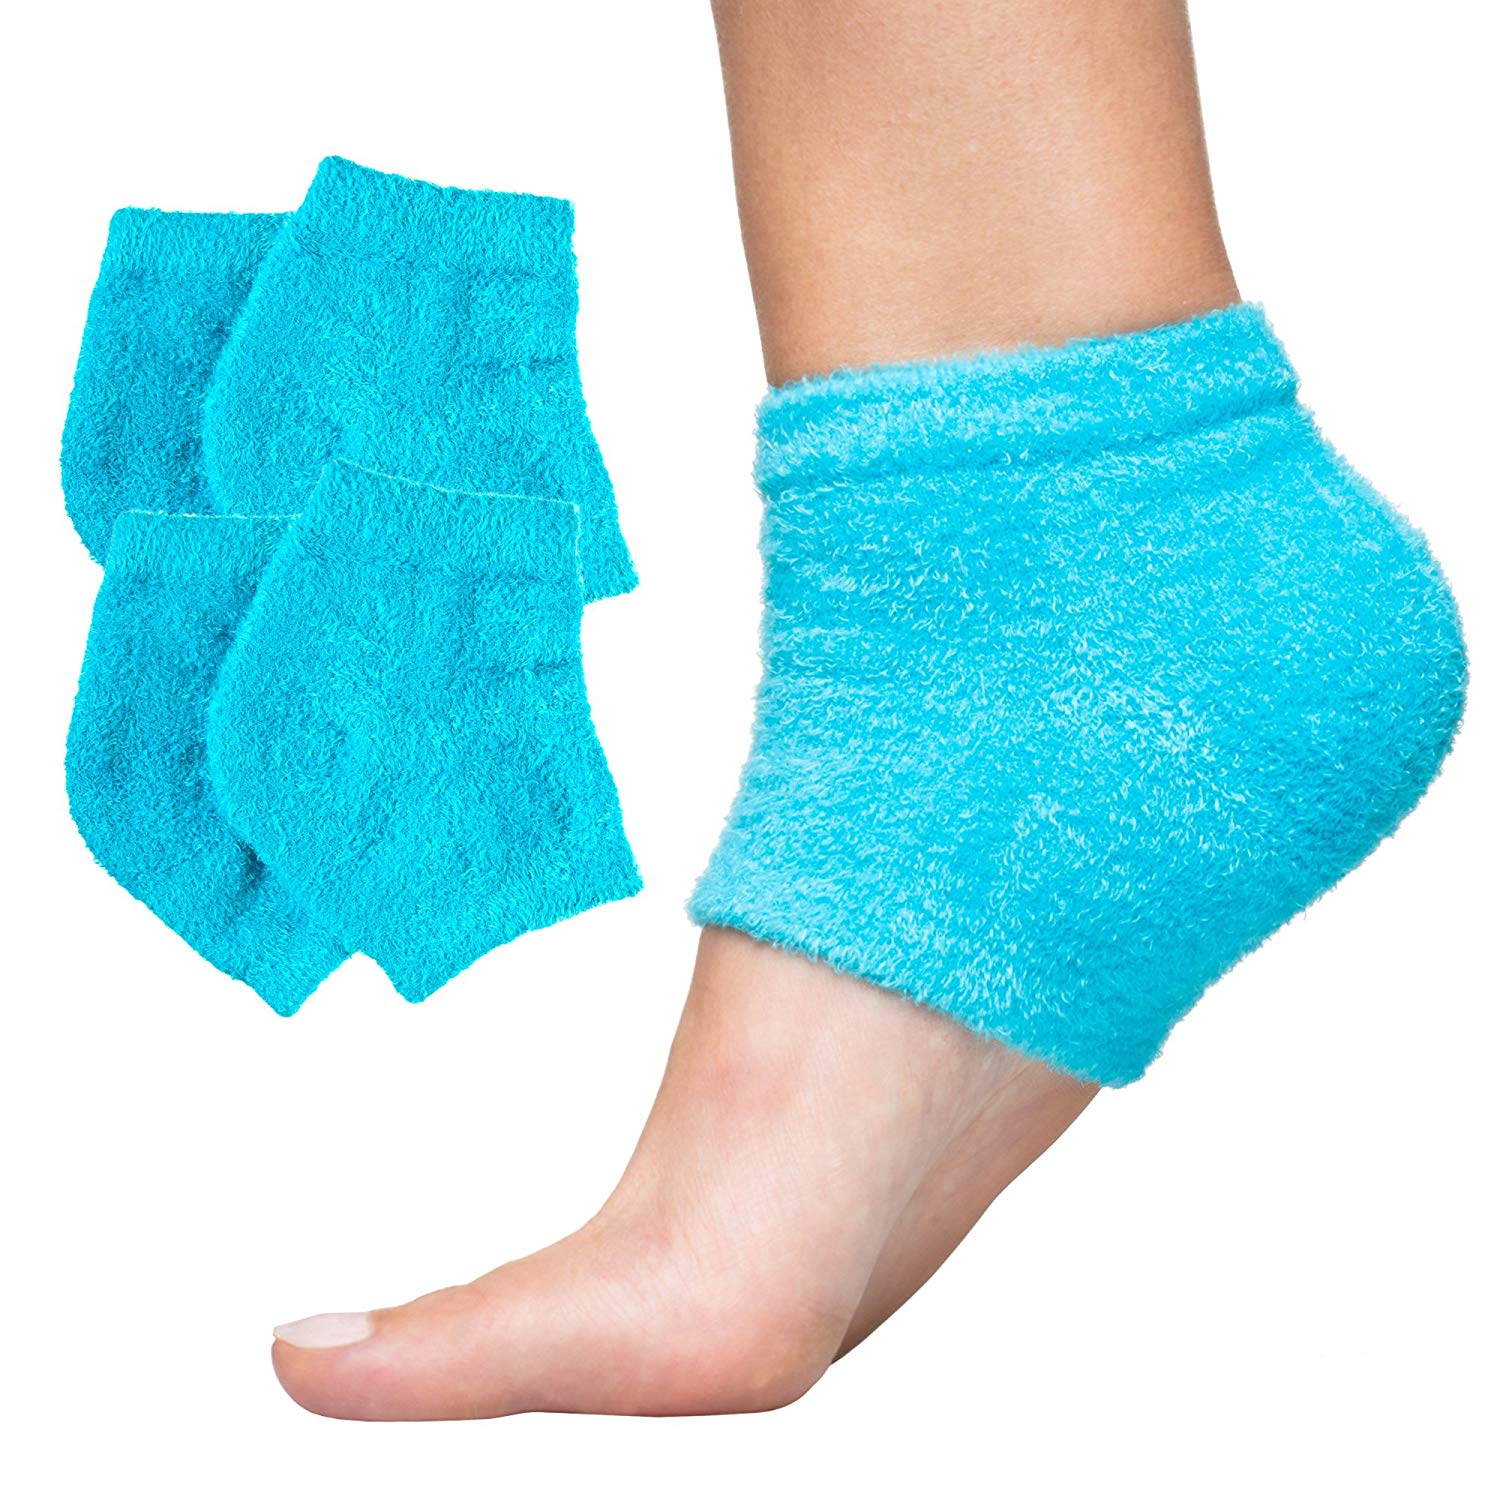 ZenToes Split Toe Bunion Socks with Built-in Padding - 1 Pair, Small - Fred  Meyer